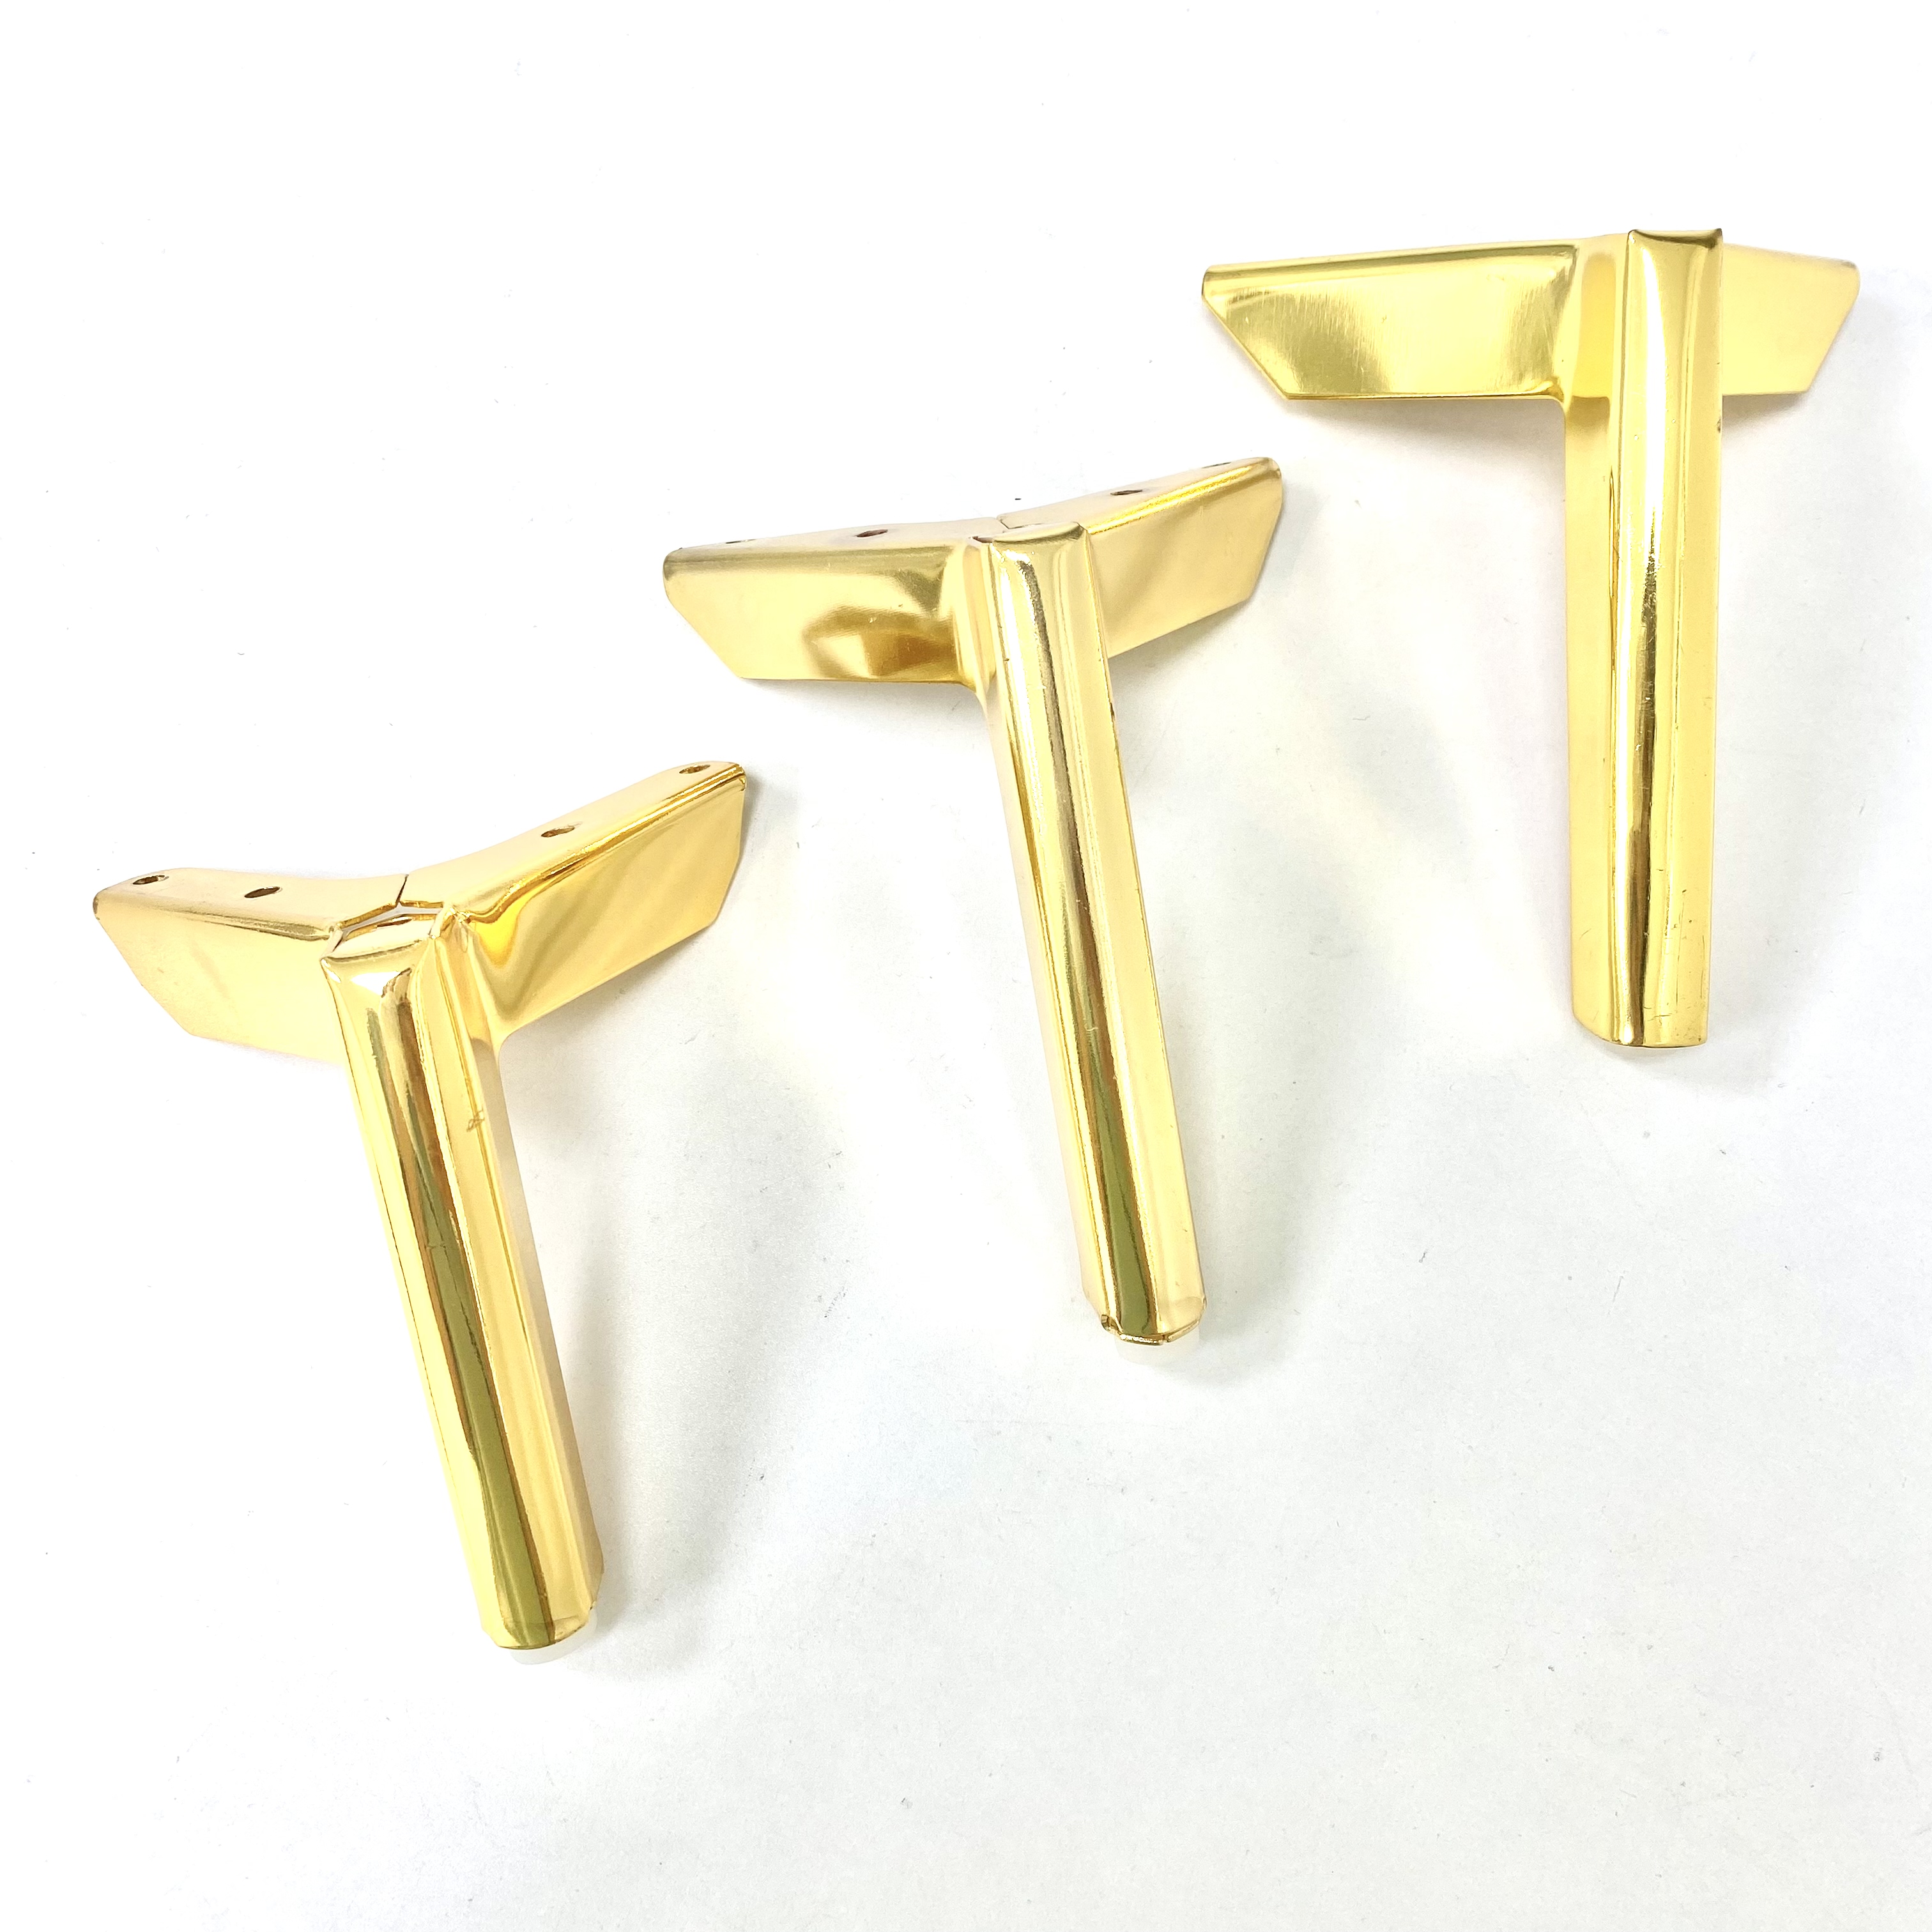 Gold Triangle Cabinet Feet And Replacement Furniture Legs